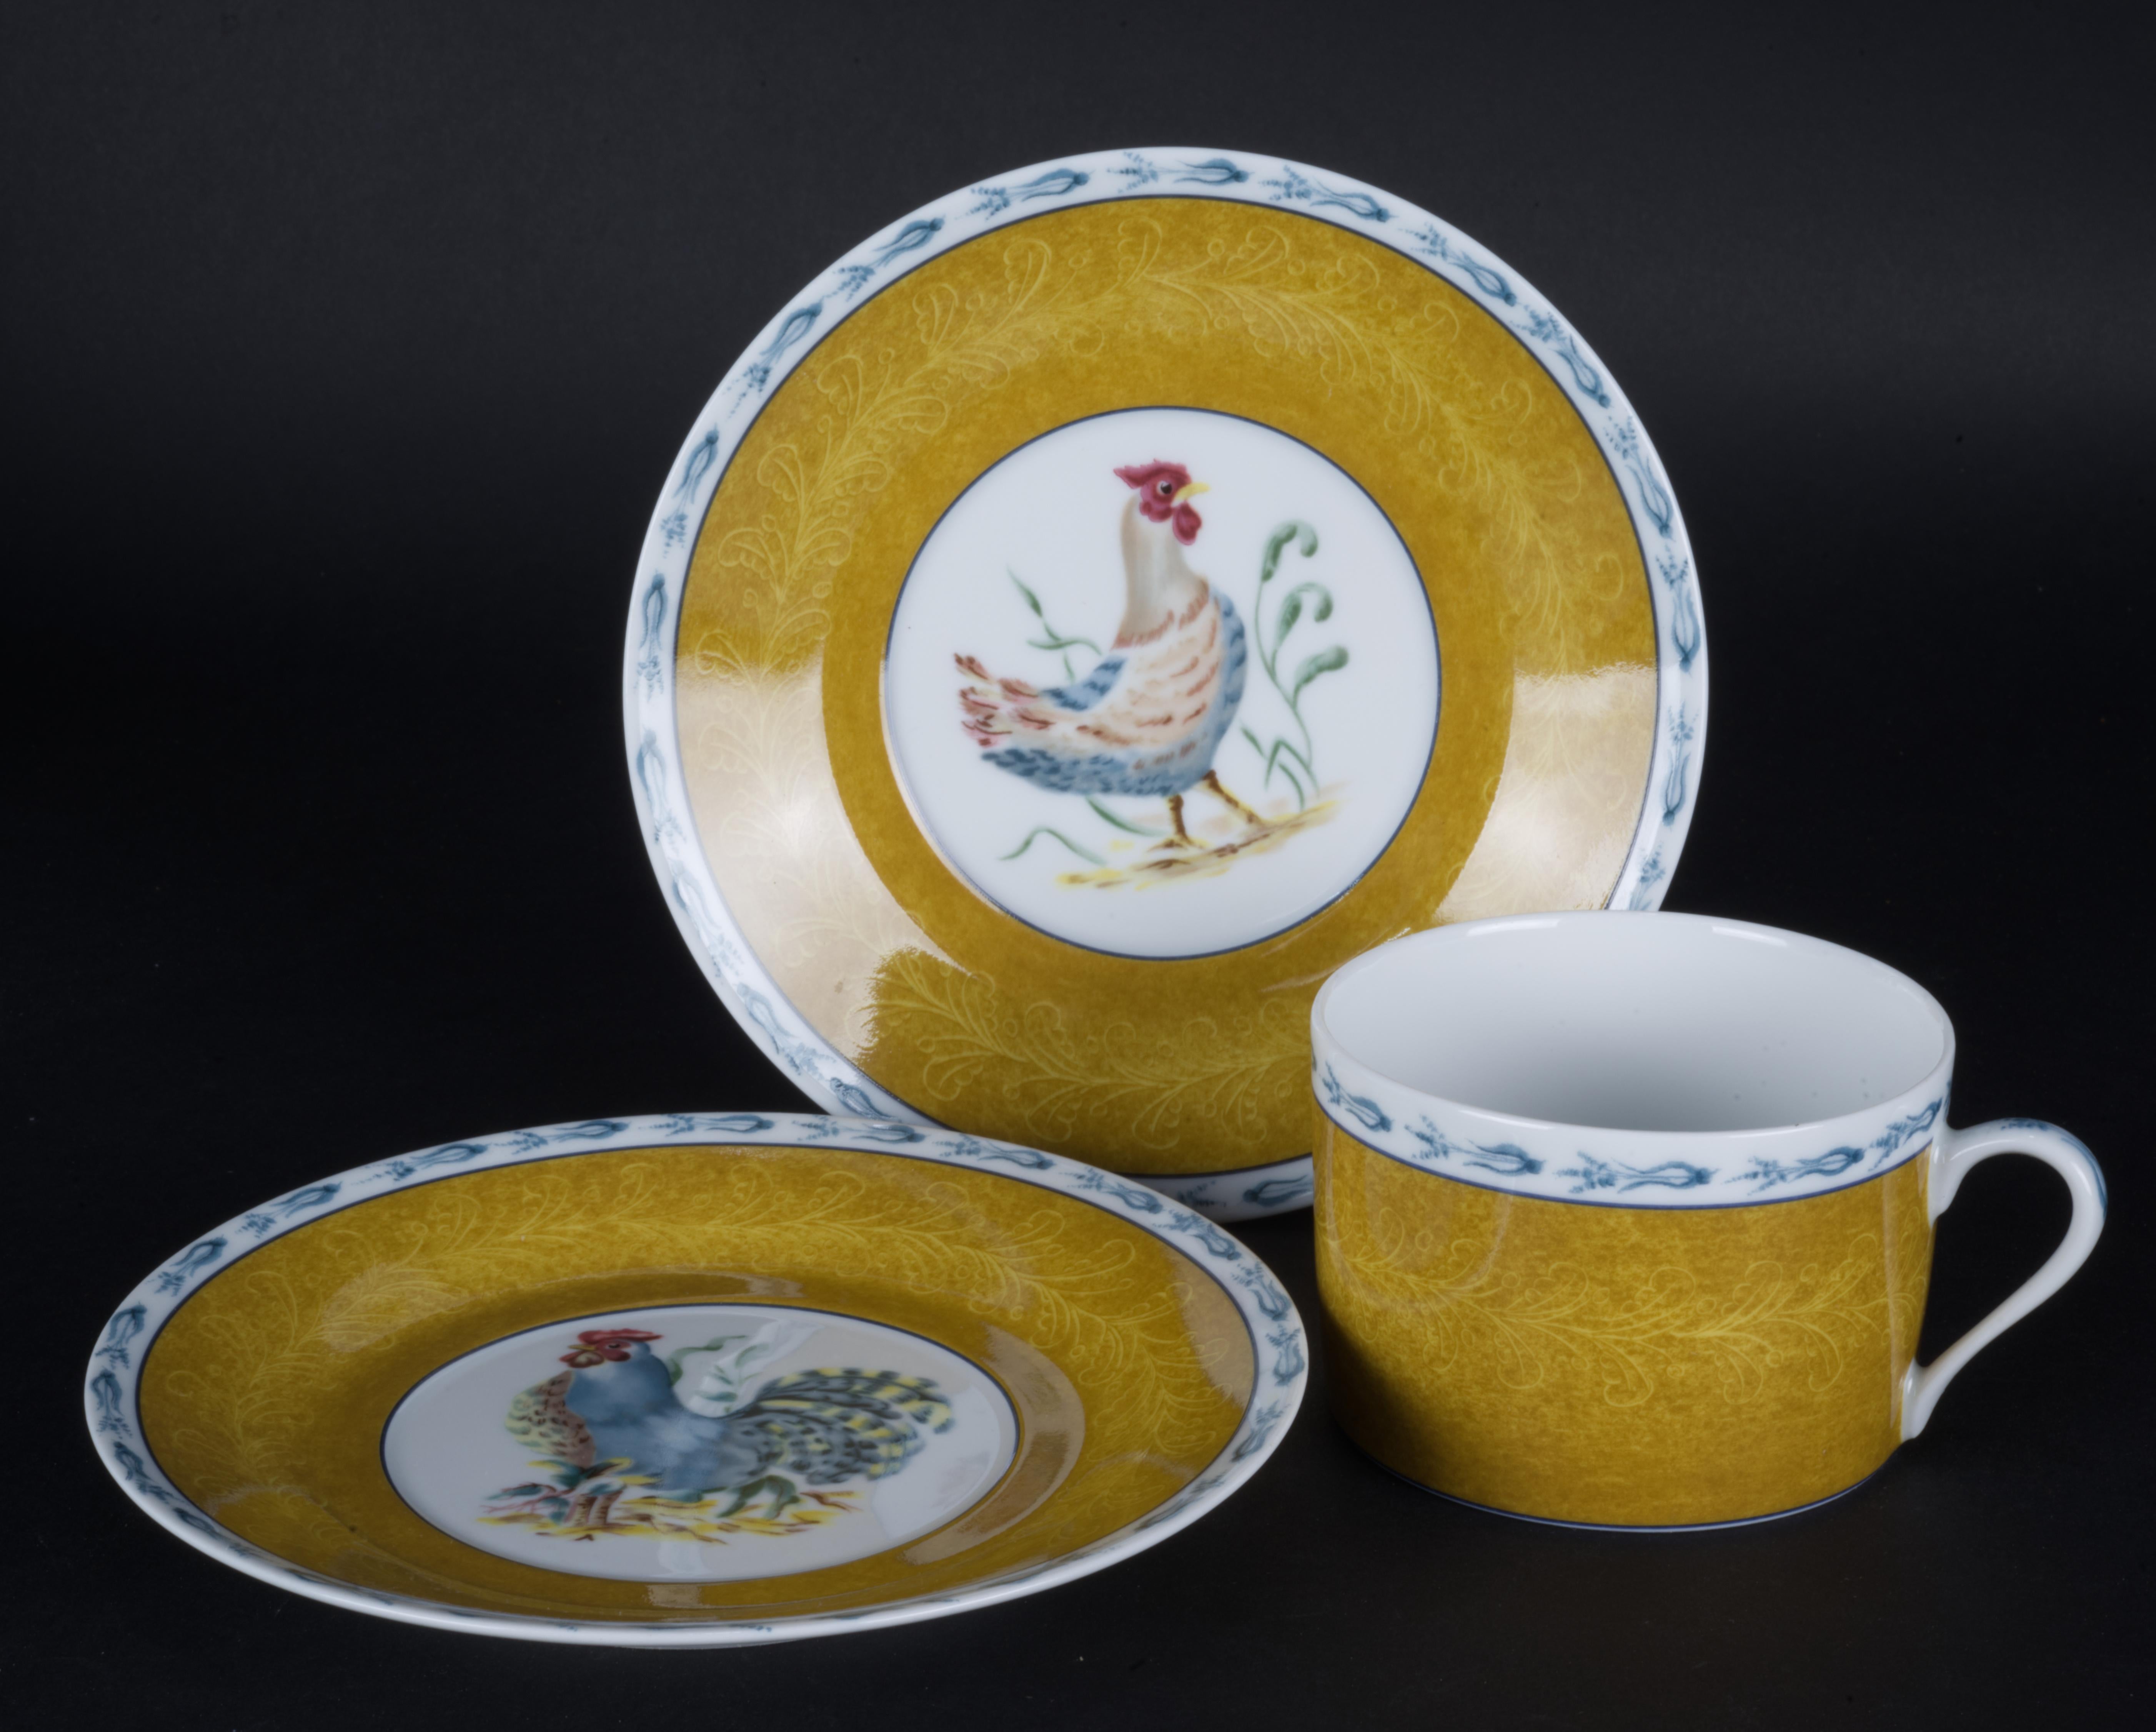 
Cup and saucers in Basse Cour pattern by Pierre Frey were made in France by Porcelaine de Limoges. The set consists of 1 cup and 2 saucers with different center decors - 1 hen and 1 rooster.

Basse Cour is a rare, discontinued pattern based on La